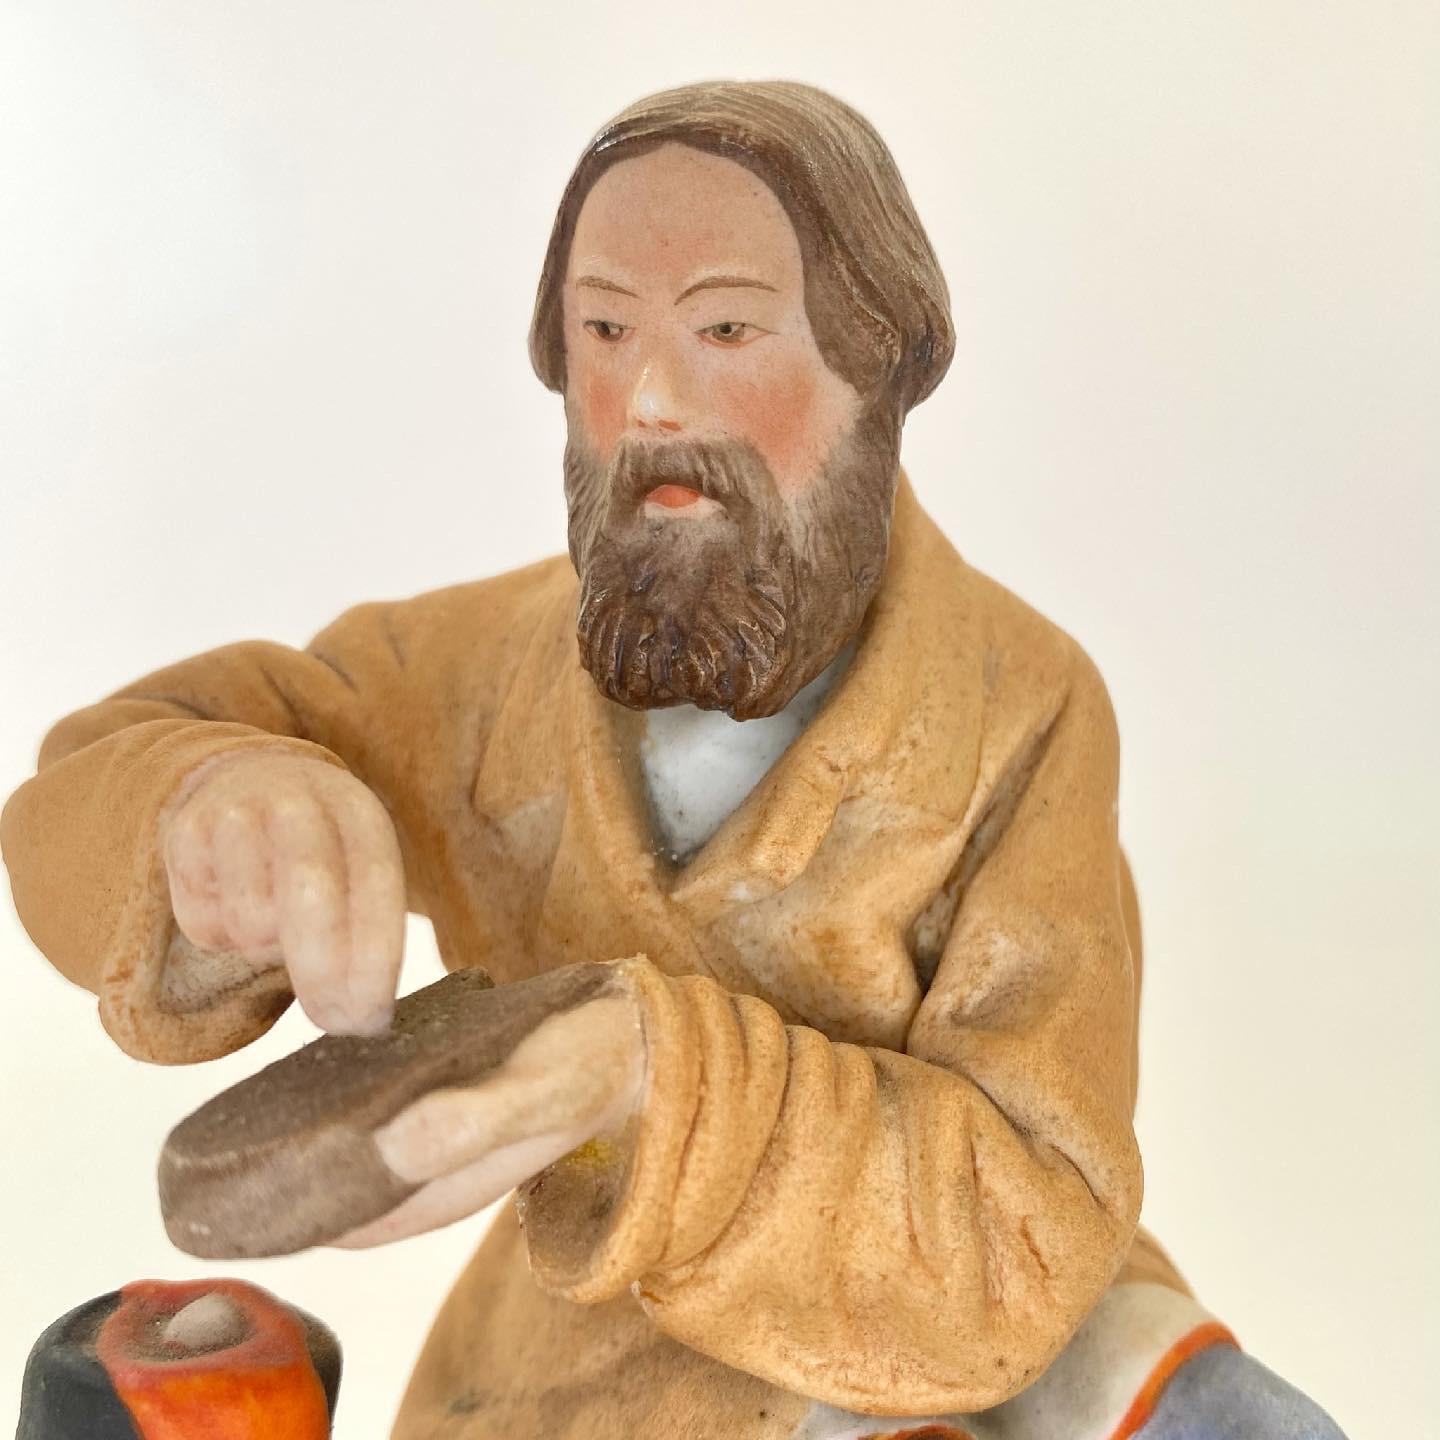 Fired Gardner Factory Porcelain Figure, Moscow, c. 1880